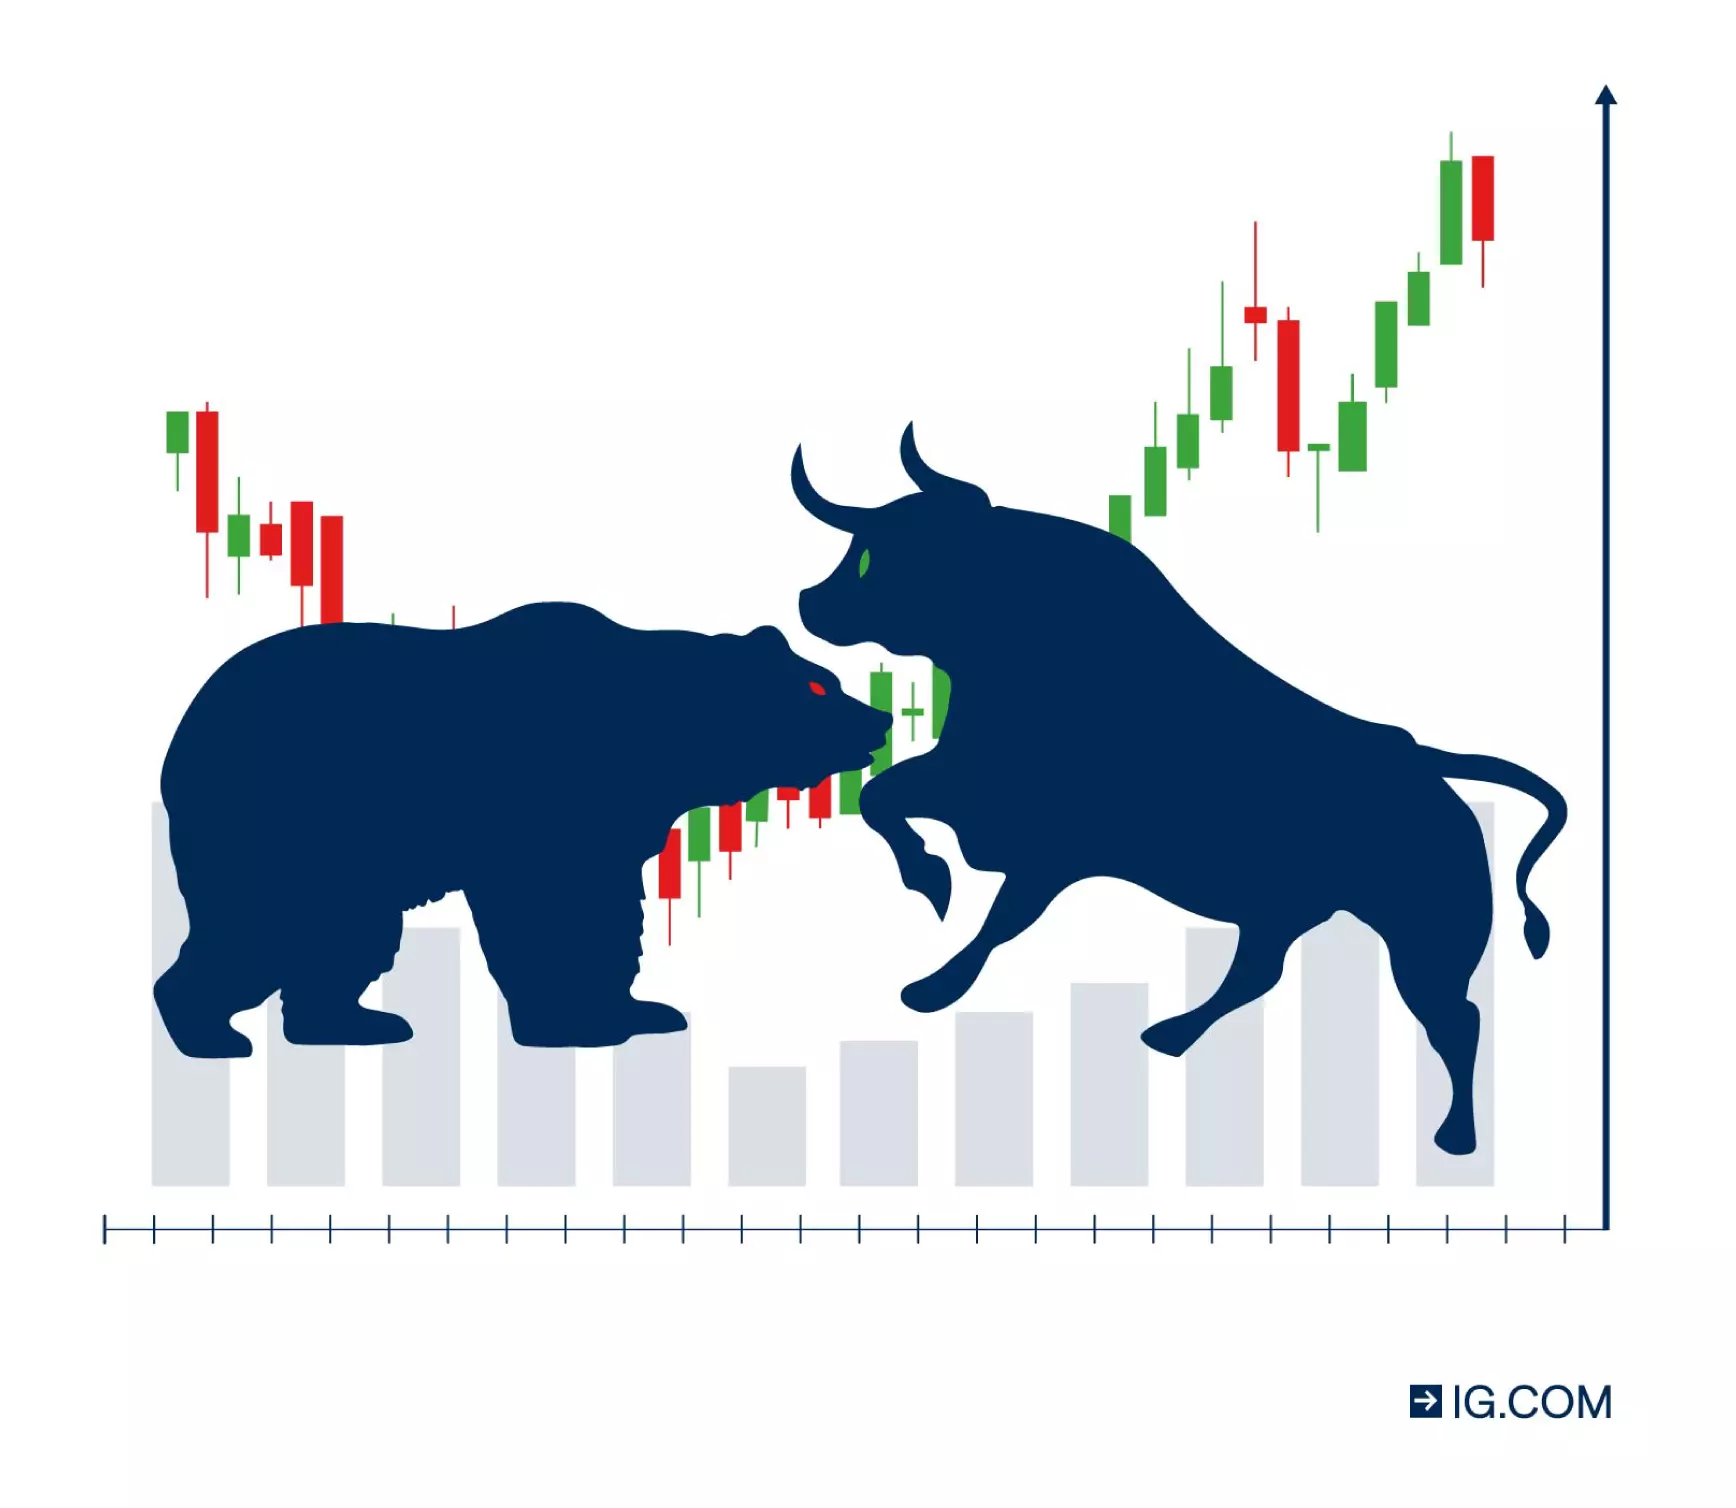 Image of a bear and a bull facing off against a backdrop of a basic candlestick chart.